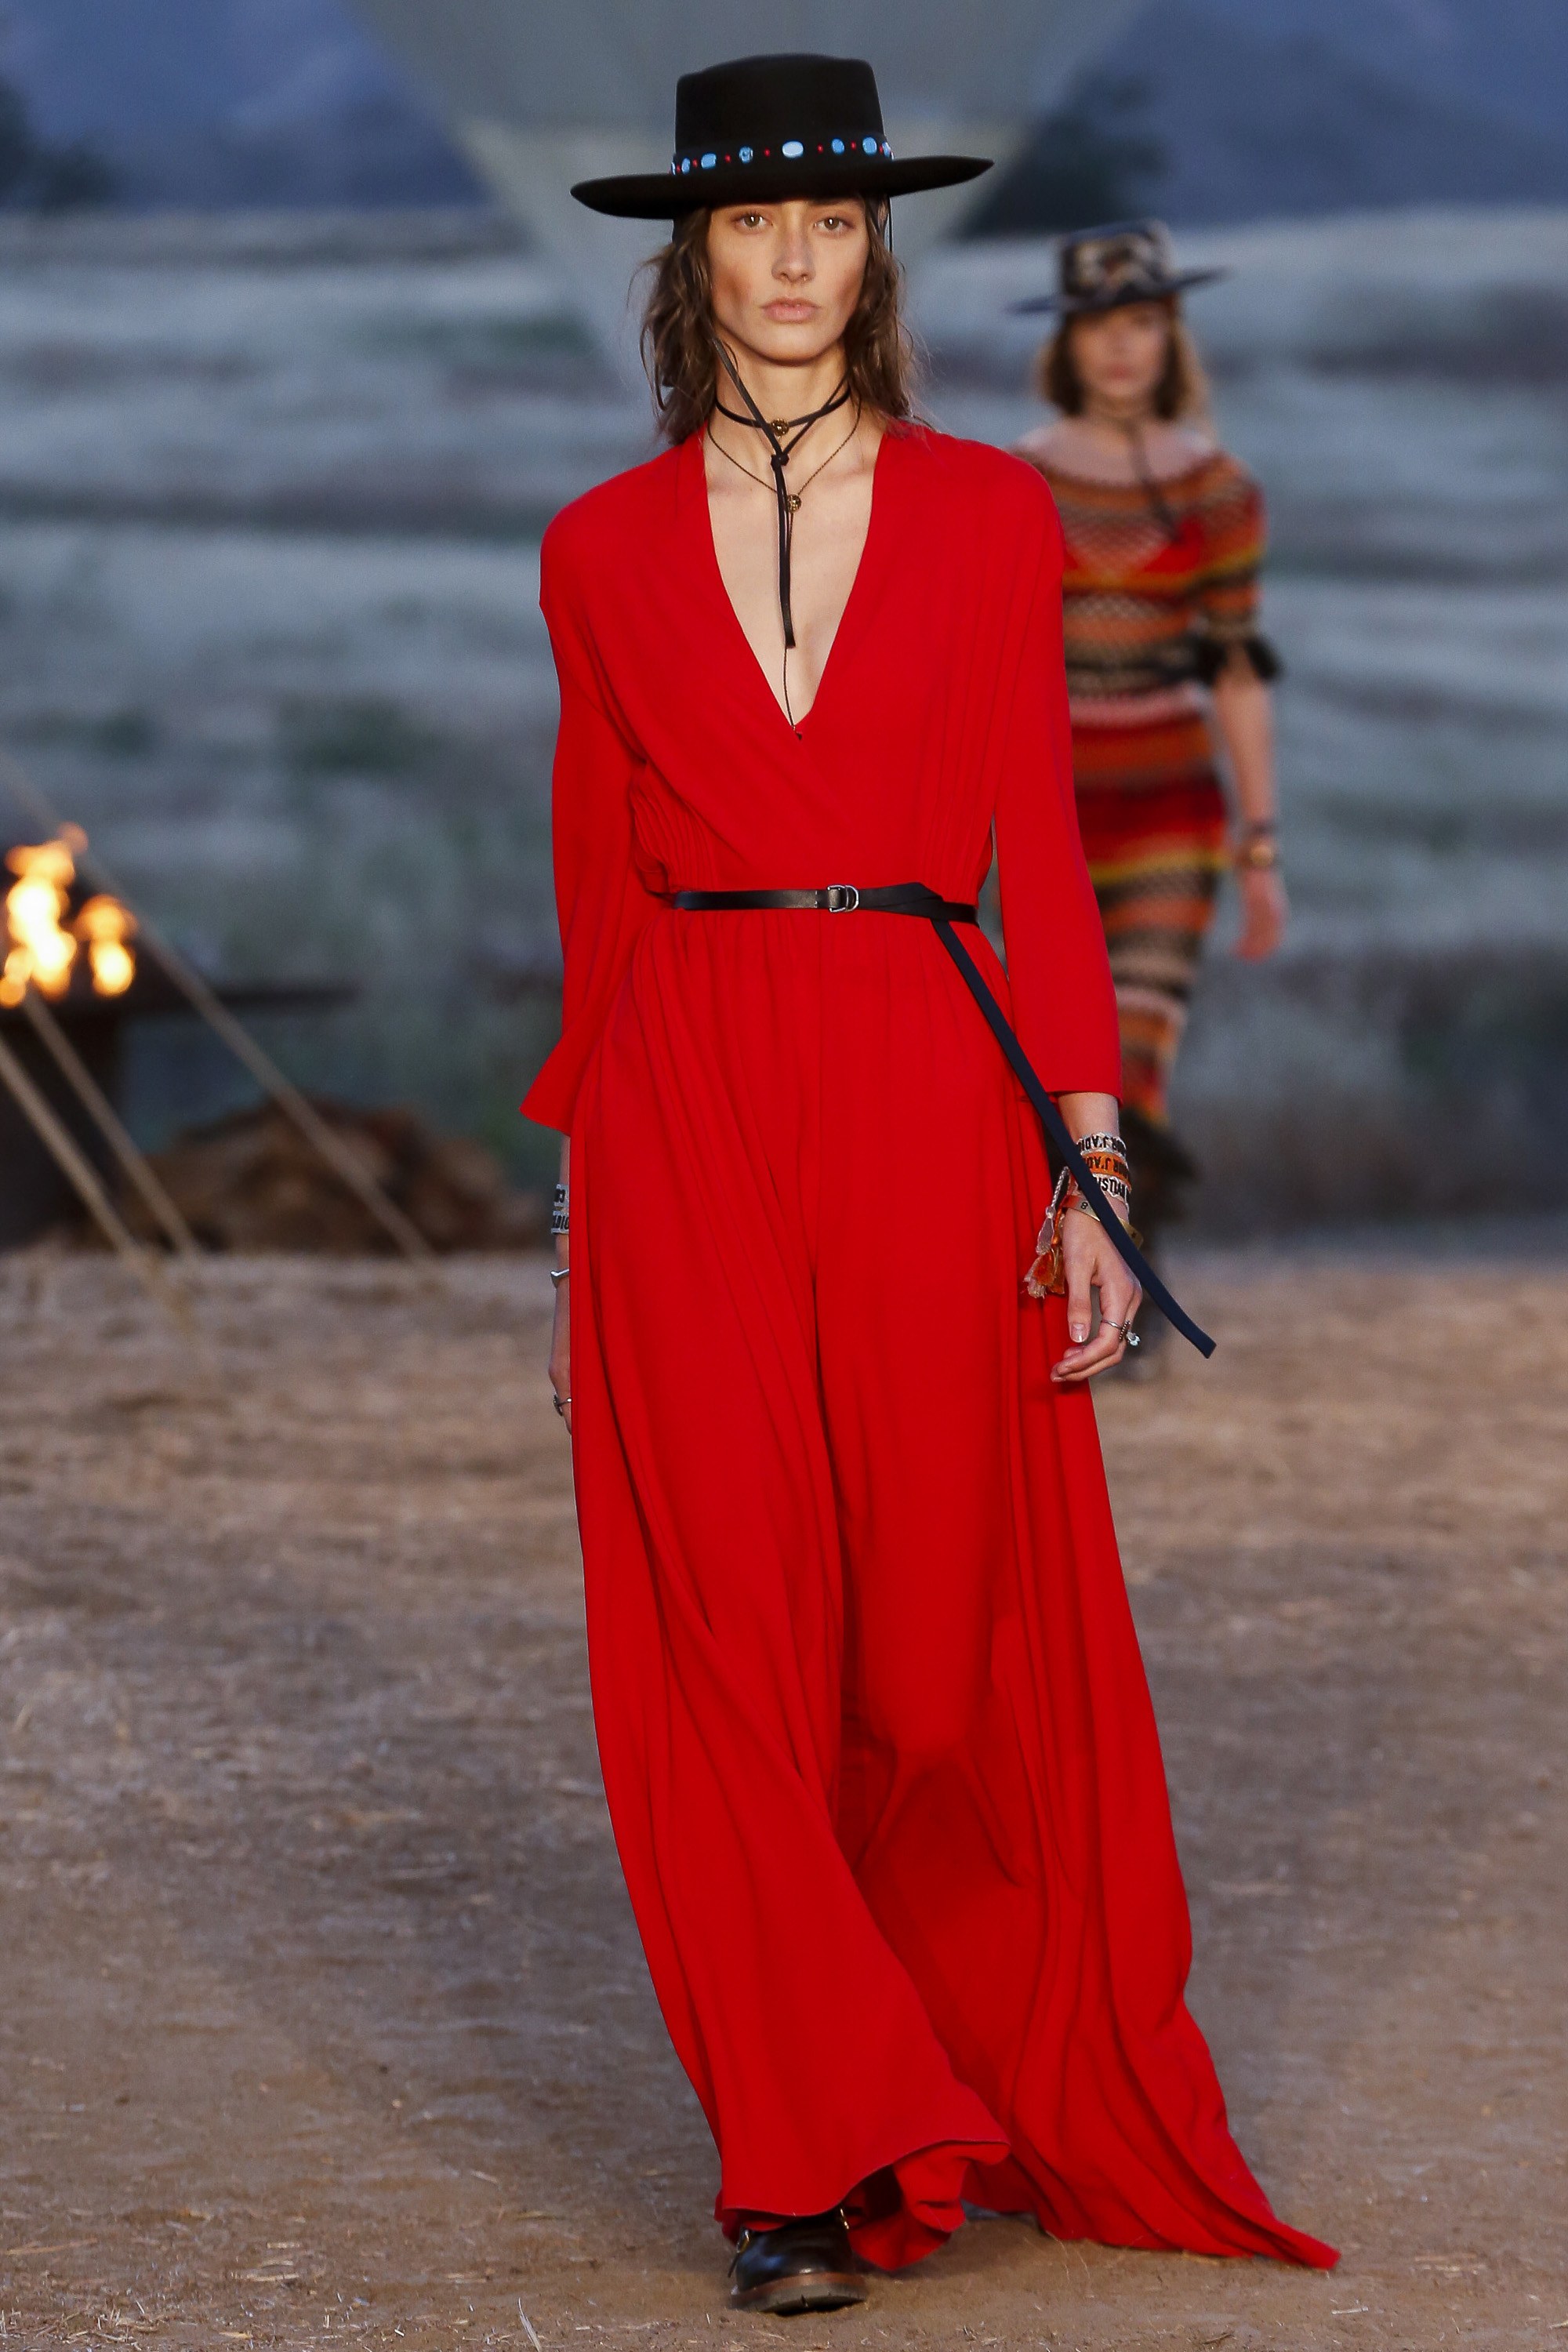 The American Frontier Christian Dior Resort 2018 Forever Chic by Meg